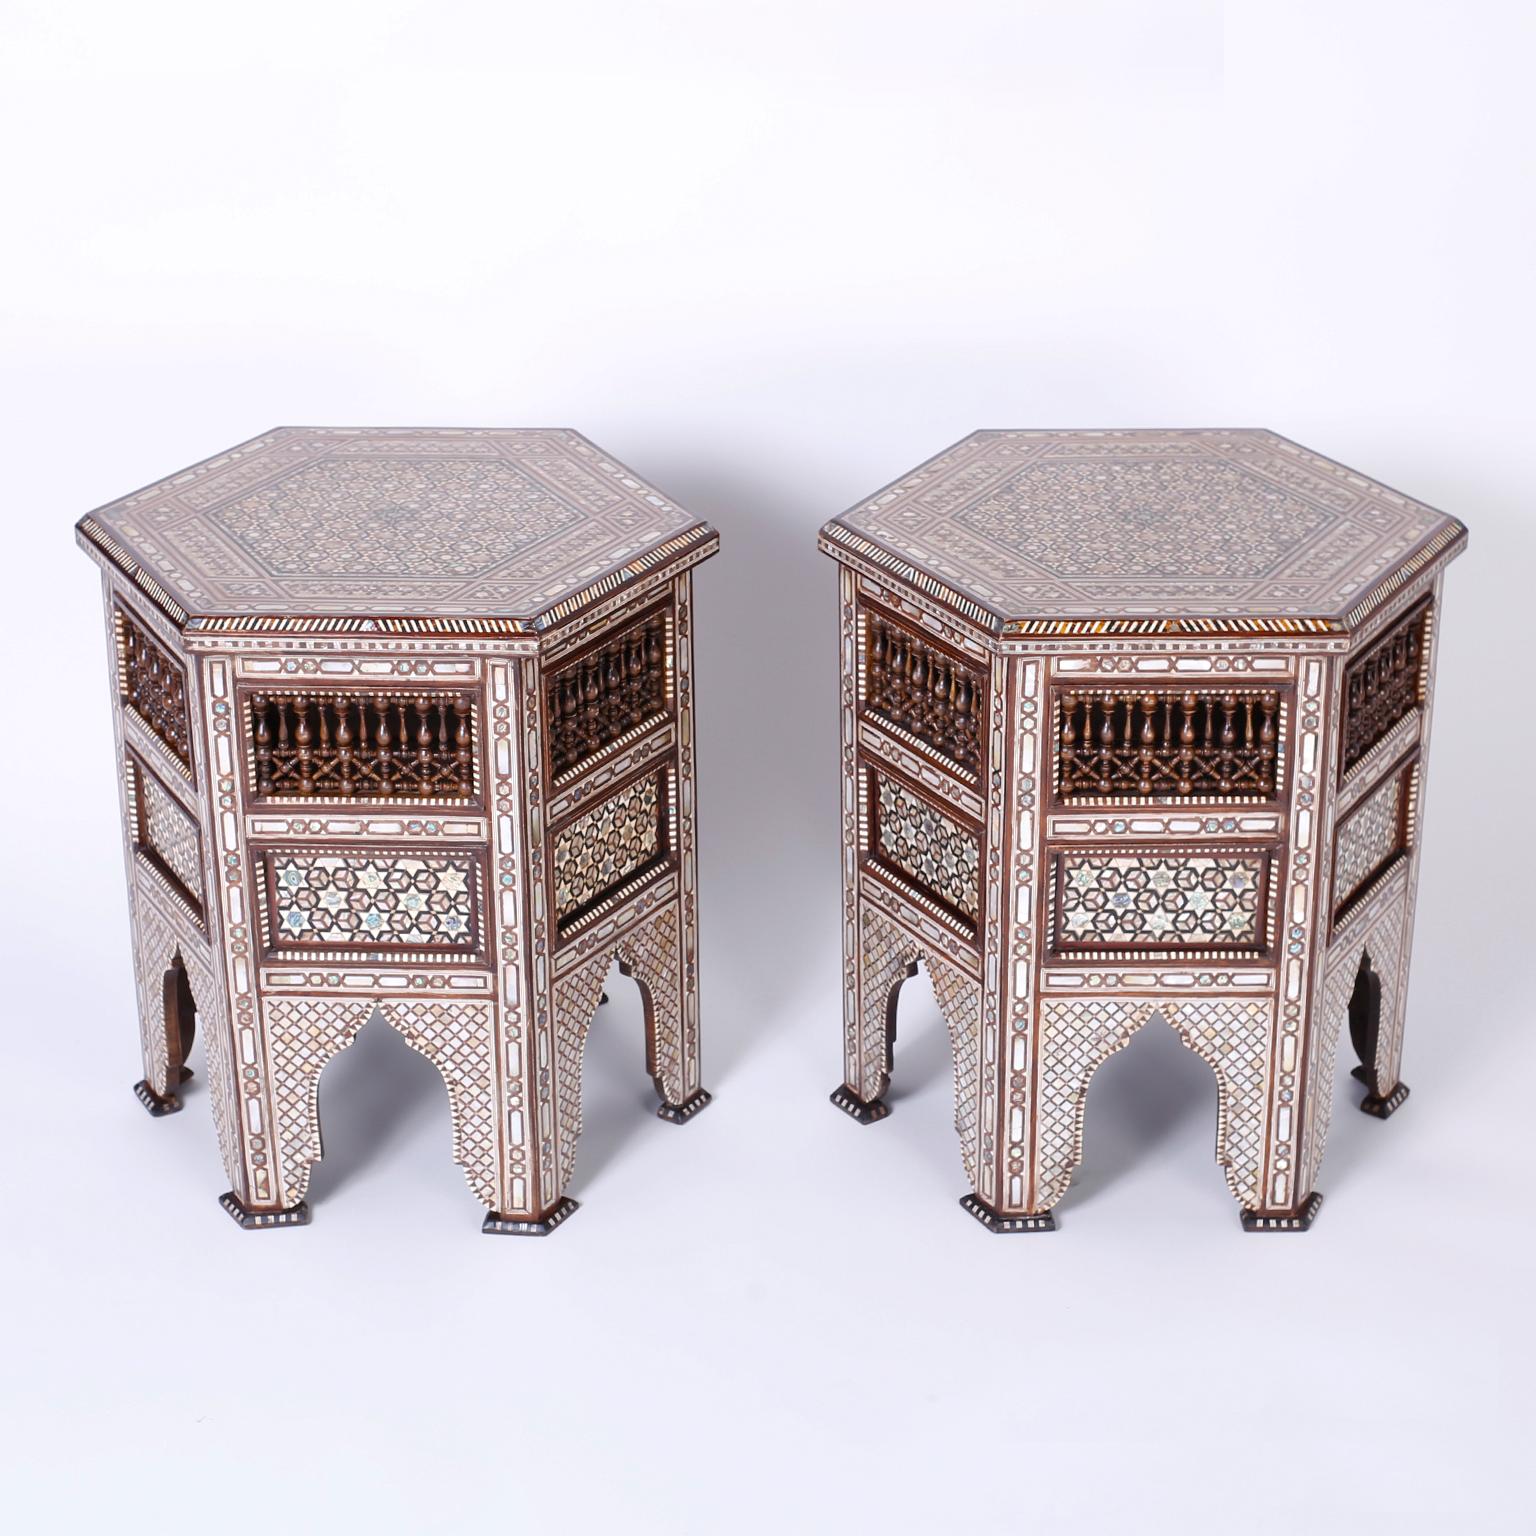 Stand out pair of Syrian walnut tables with a hexagon form and featuring elaborate geometric inlays of mother of pearl, bone and exotic hardwoods, stick and ball panels and six legs separated by Moorish arches. Best of the genre.